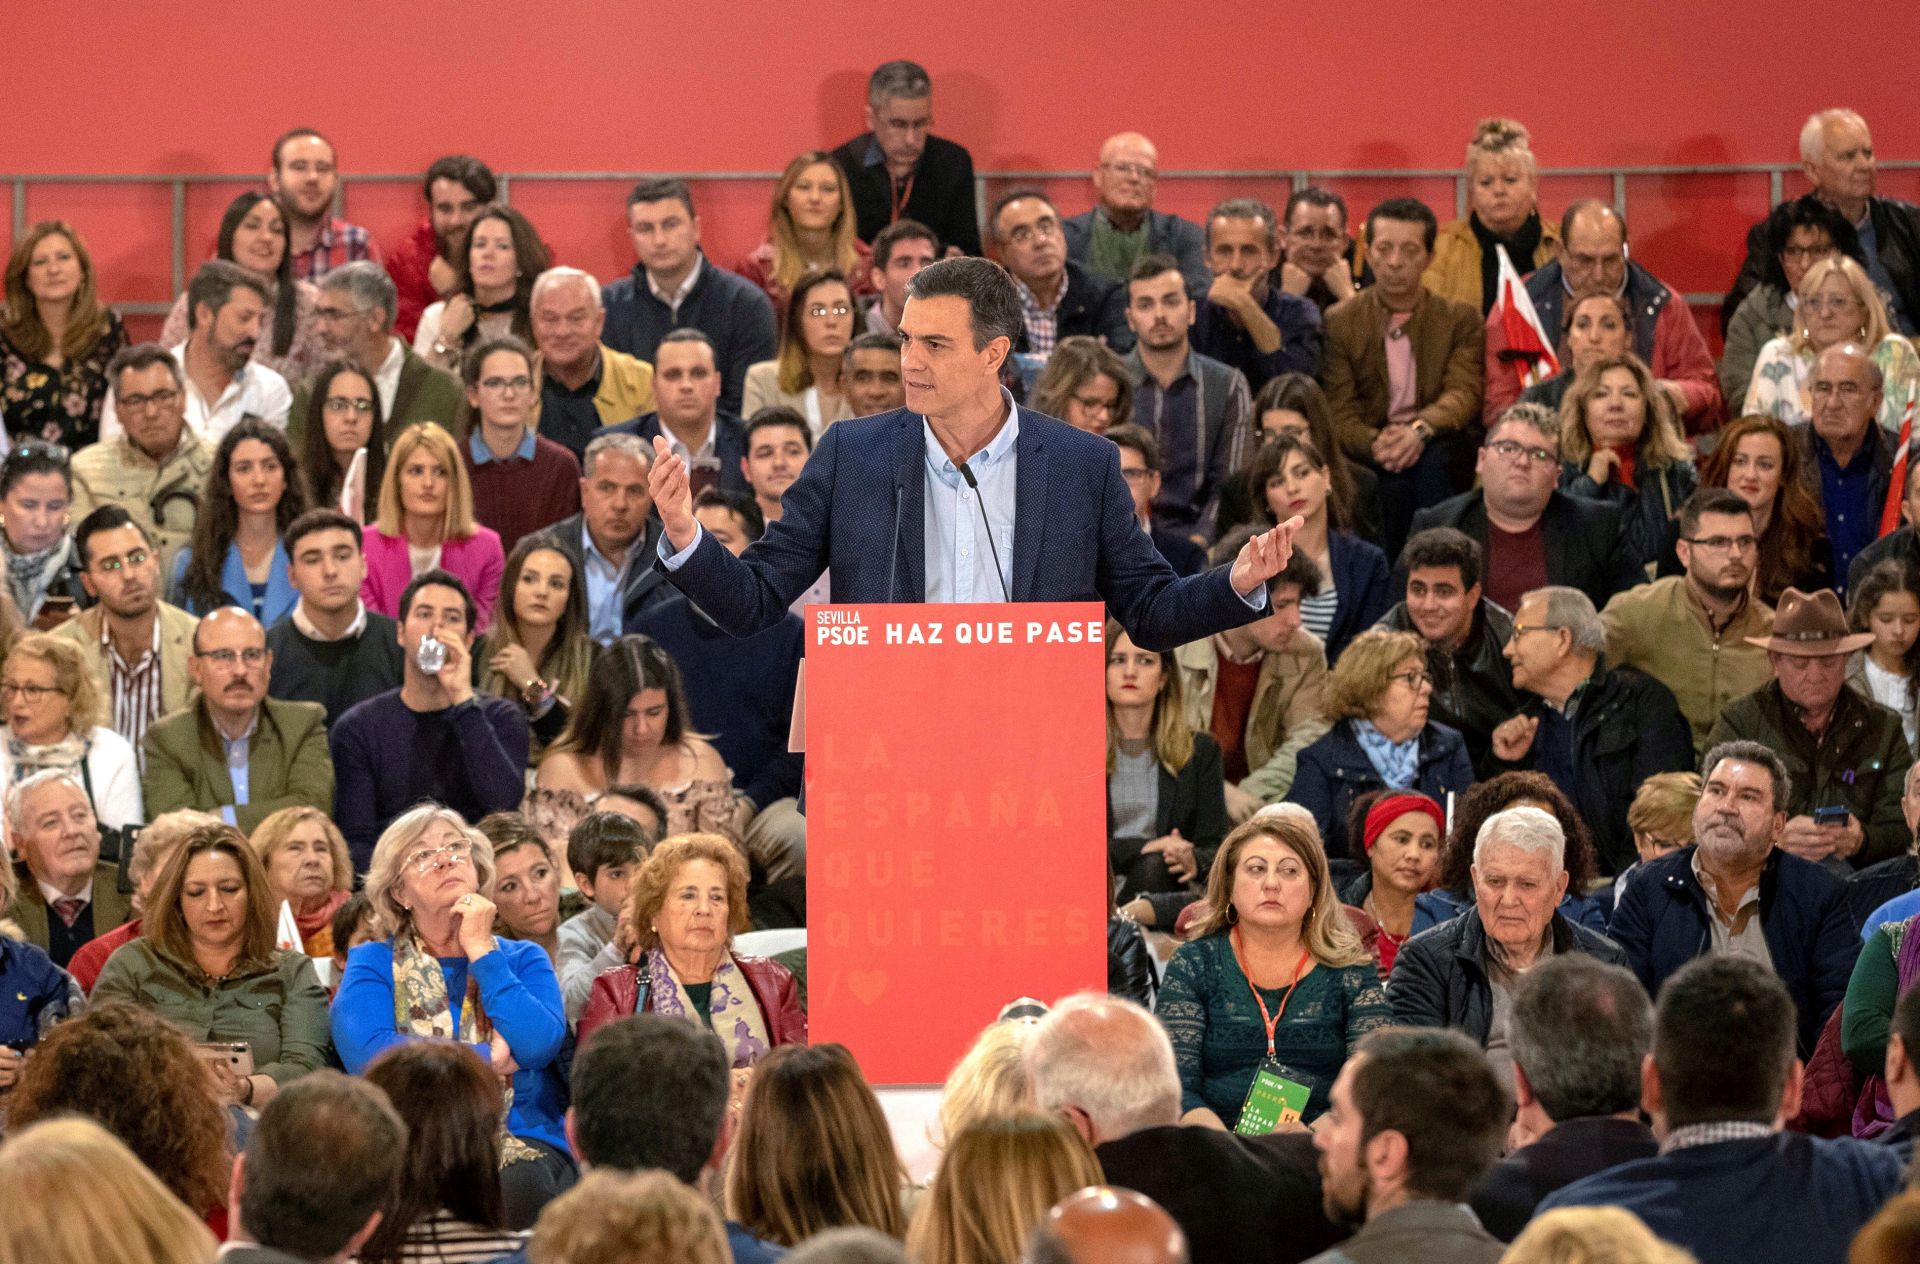 epa07488255 Spanish Prime Minister and candidate for the reelection for Spanish Socialist Workers' Party (PSOE) Pedro Sanchez delivers his speech during a political rally of PSOE in Seville, in the autonomous community of Andalusia, southern Spain, 06 April 2019. Spain will hold anticipated general elections on the upcoming 28 April.  EPA/Julio Munoz